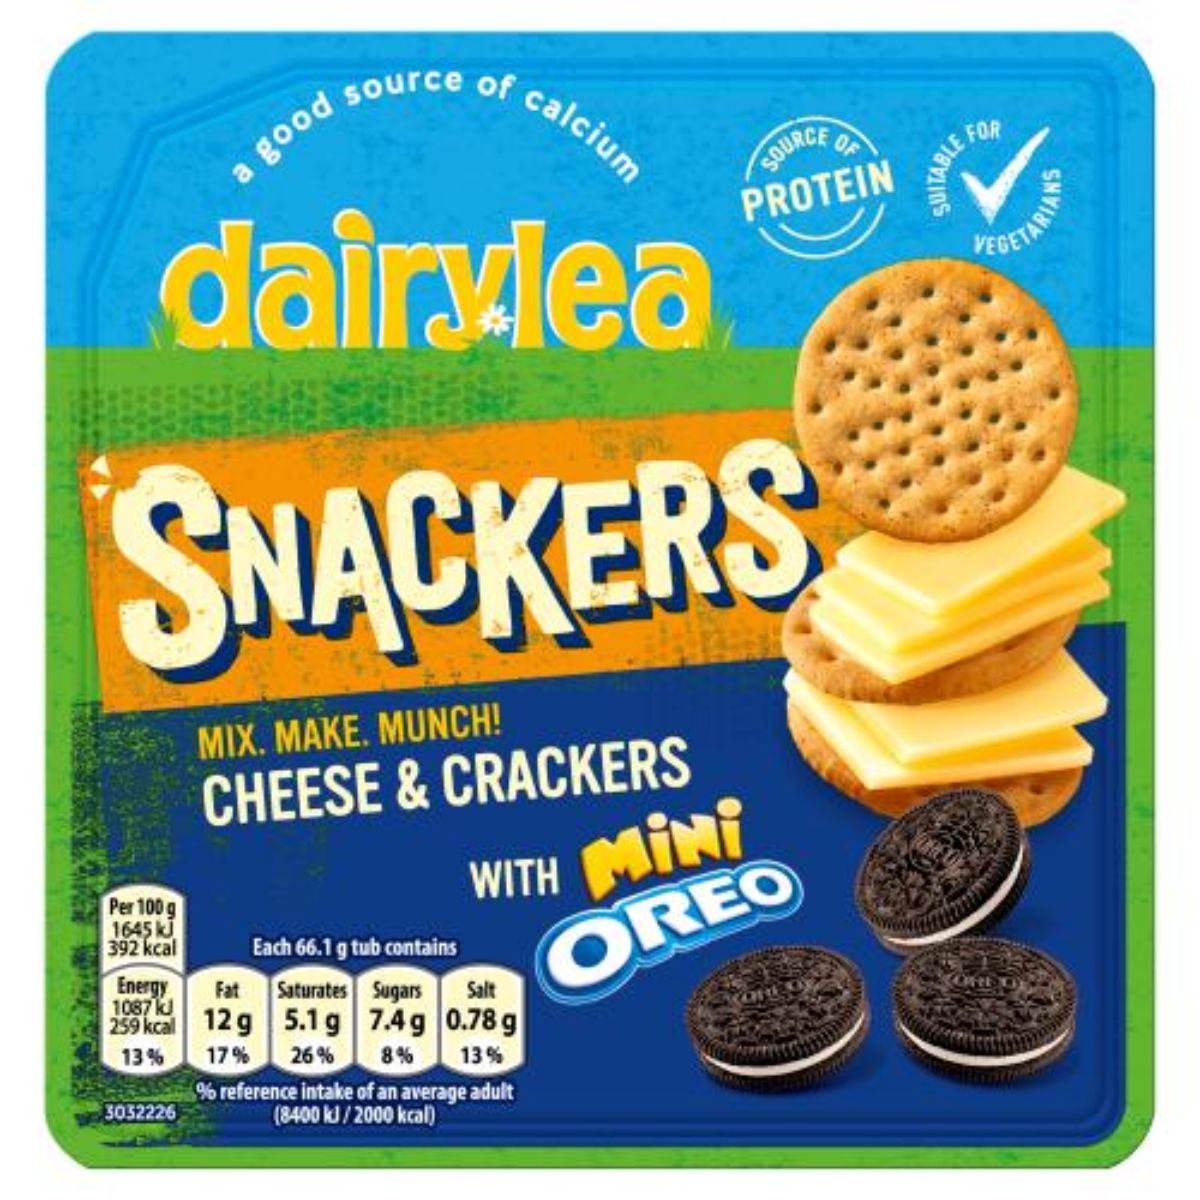 Dairylea - Snackers Cheese & Crackers with Mini Oreo - 66g mix munch & cheese crackers with oreo.